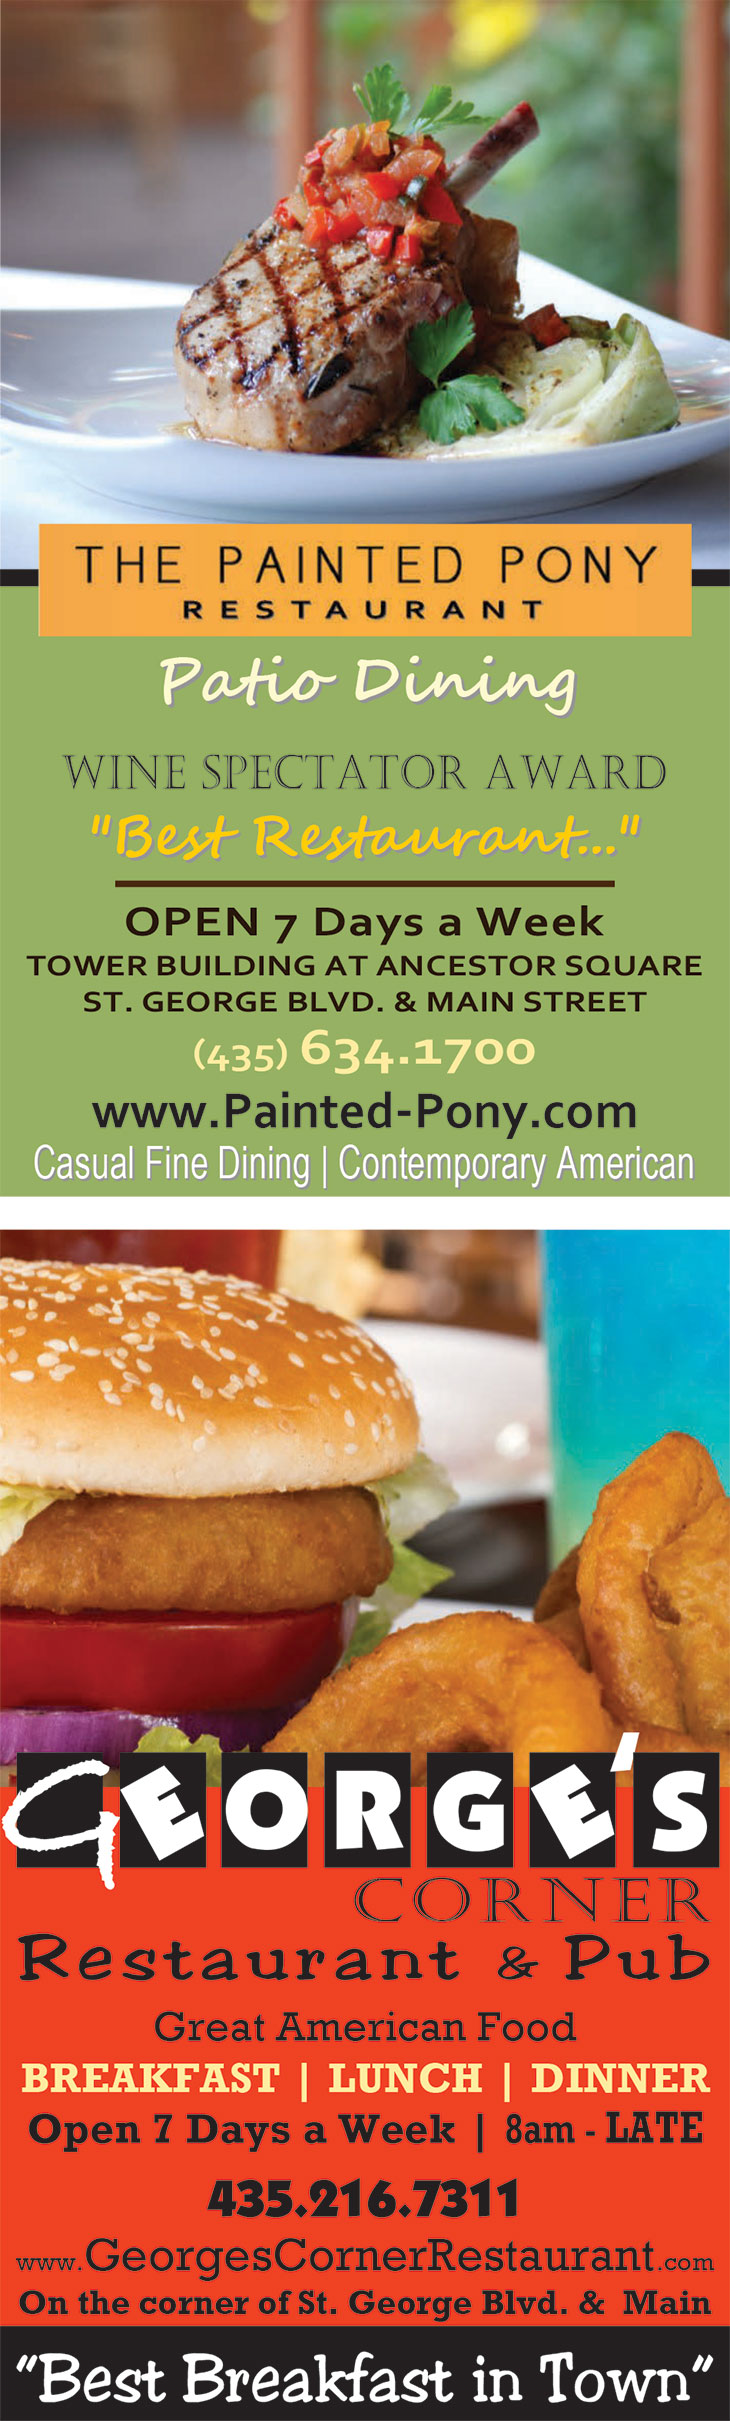 Painted Pony and Georges Corner ads